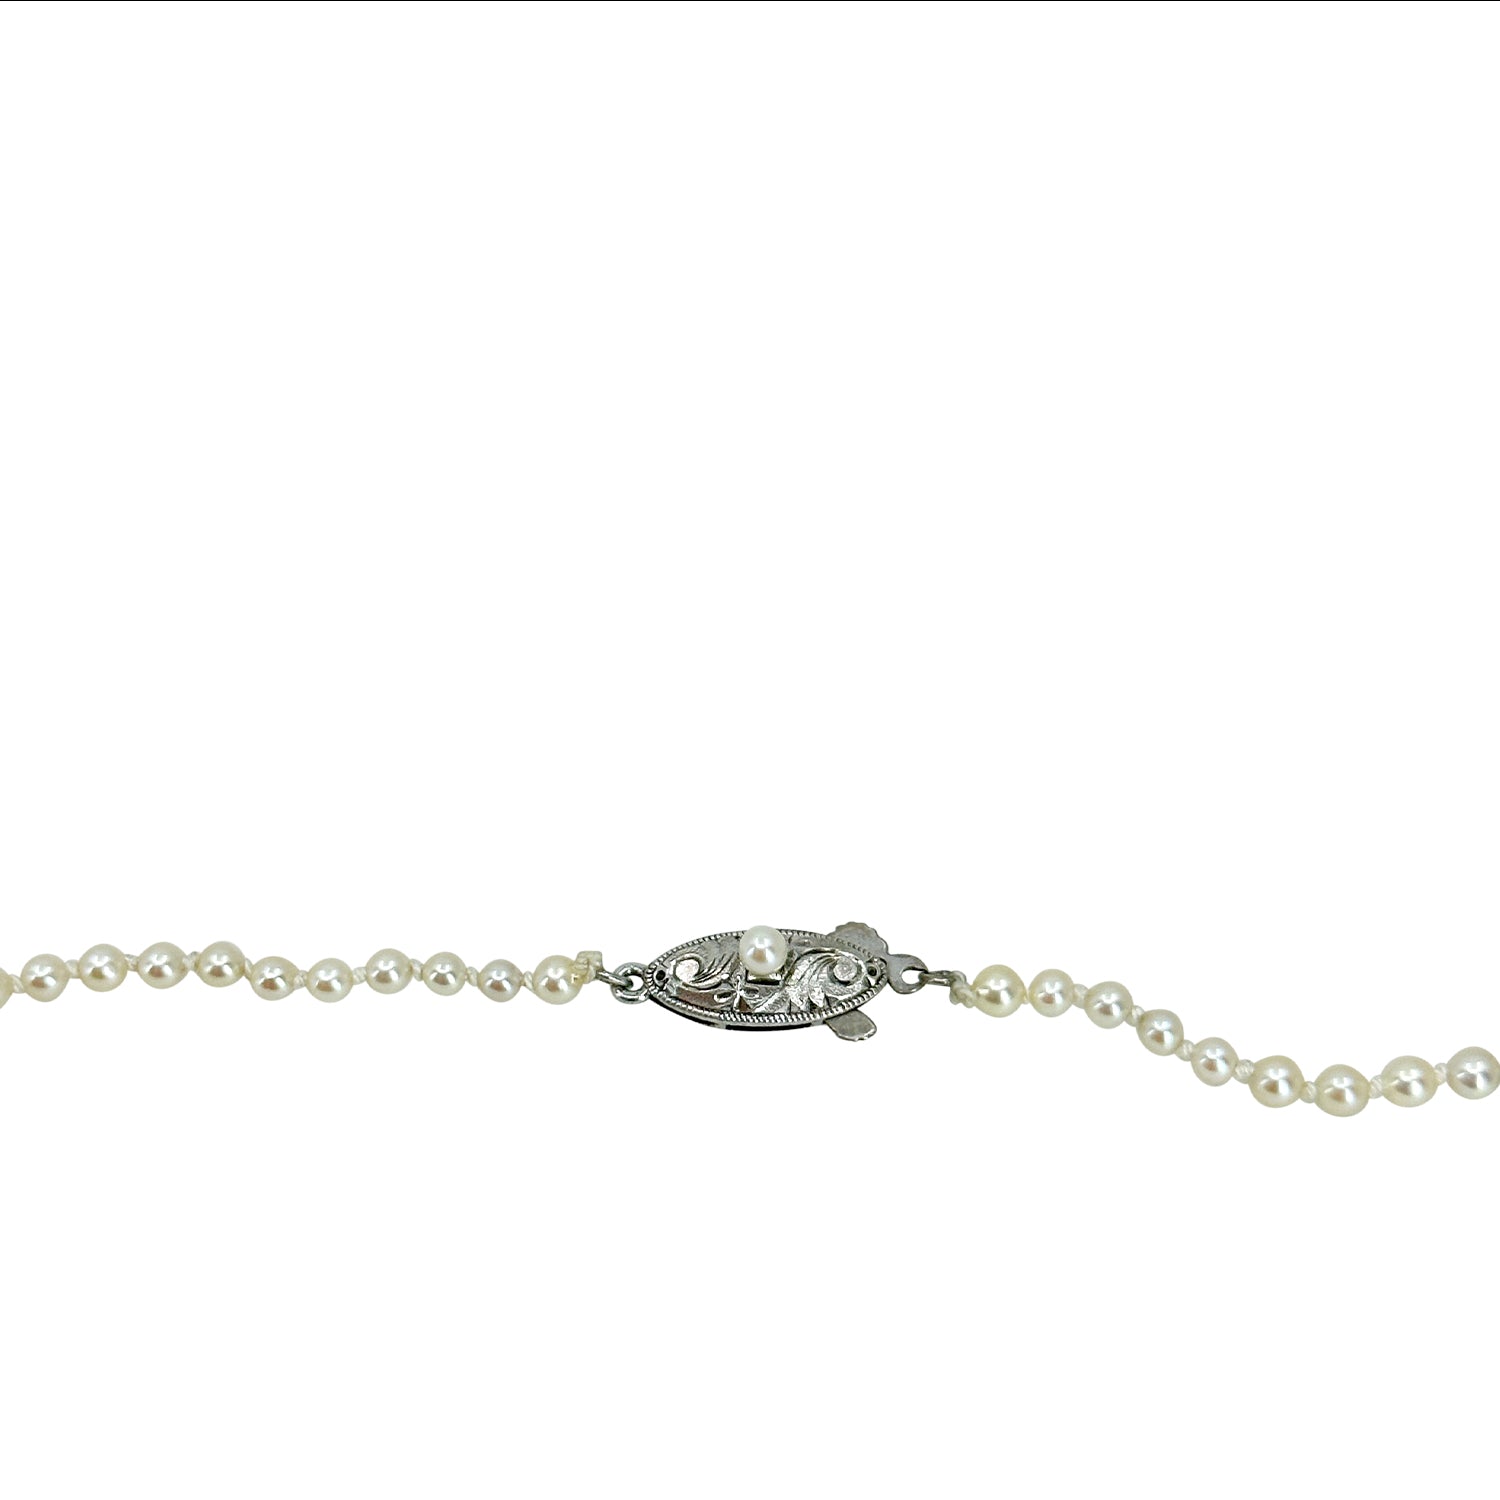 Petite Graduated Japanese Saltwater Cultured Akoya Seed Pearl Vintage Necklace - Sterling Silver 17.75 Inch